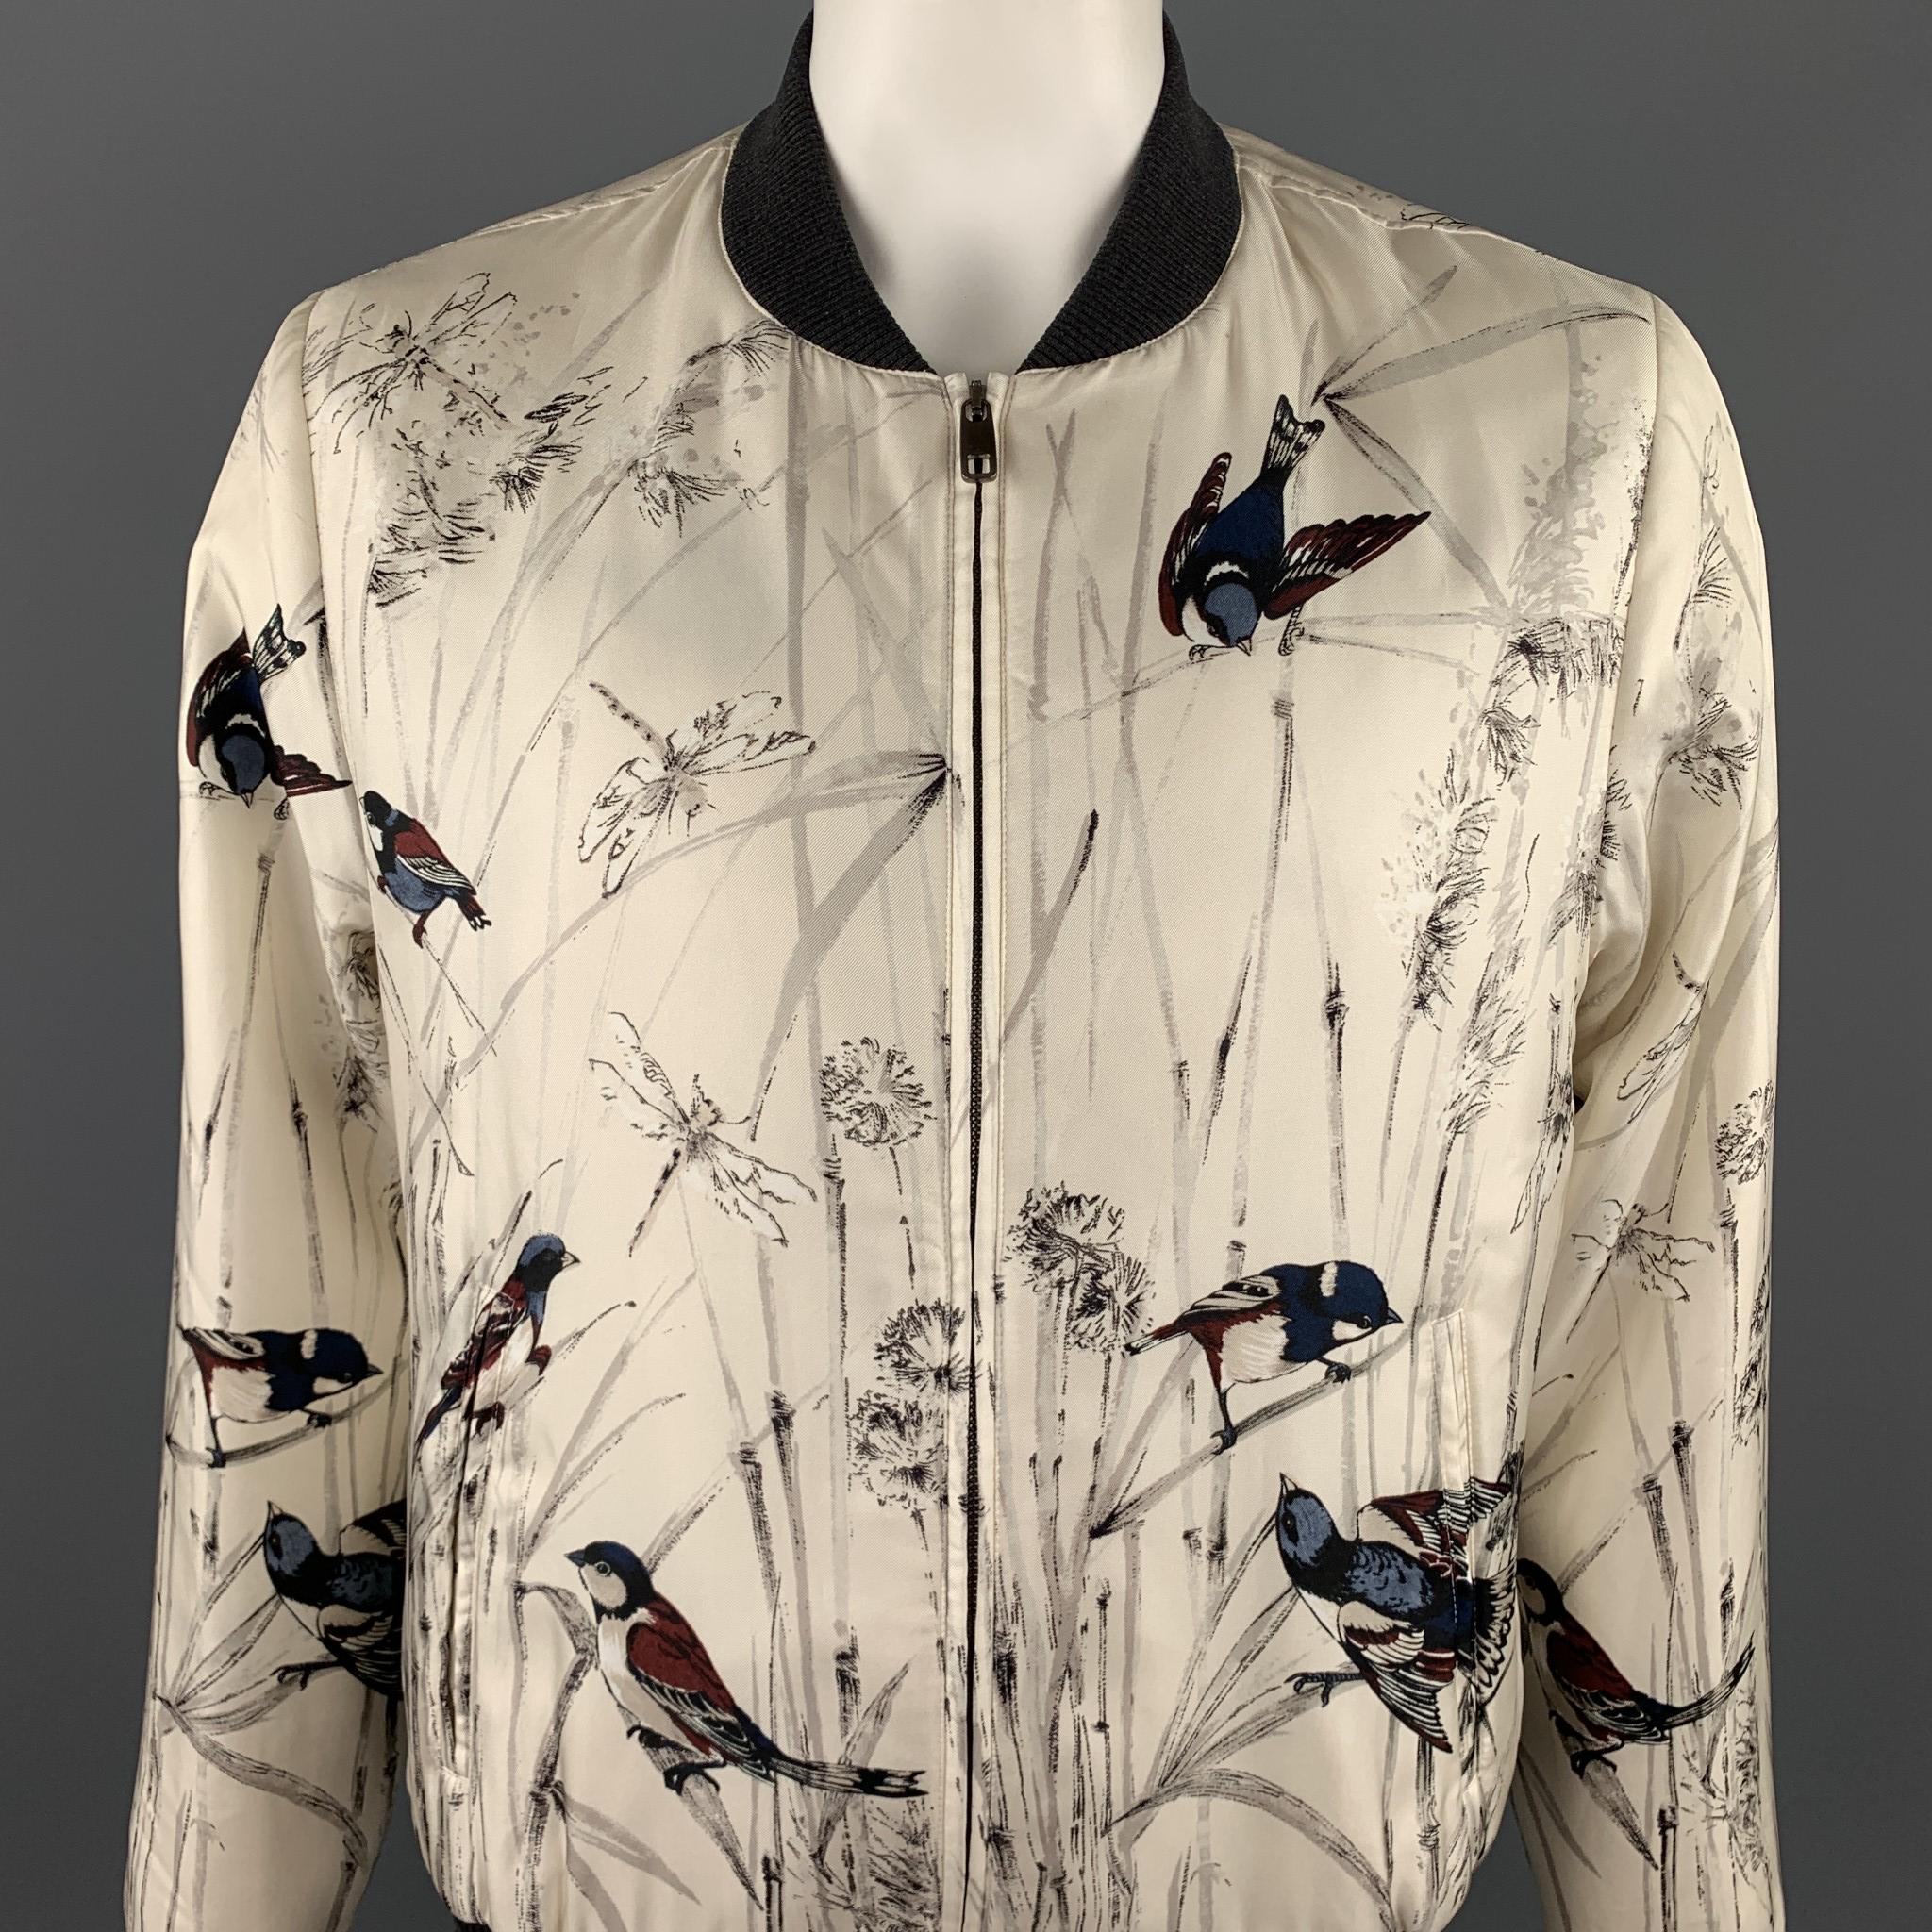 DOLCE & GABBANA jacket comes in a beige silk with a all over bird print featuring a bomber style and a zip up closure. Made in Italy.

Very Good Pre-Owned Condition.
Marked: IT 54
Original Retail Price: $3,150.00

Measurements:

Shoulder: 18 in.